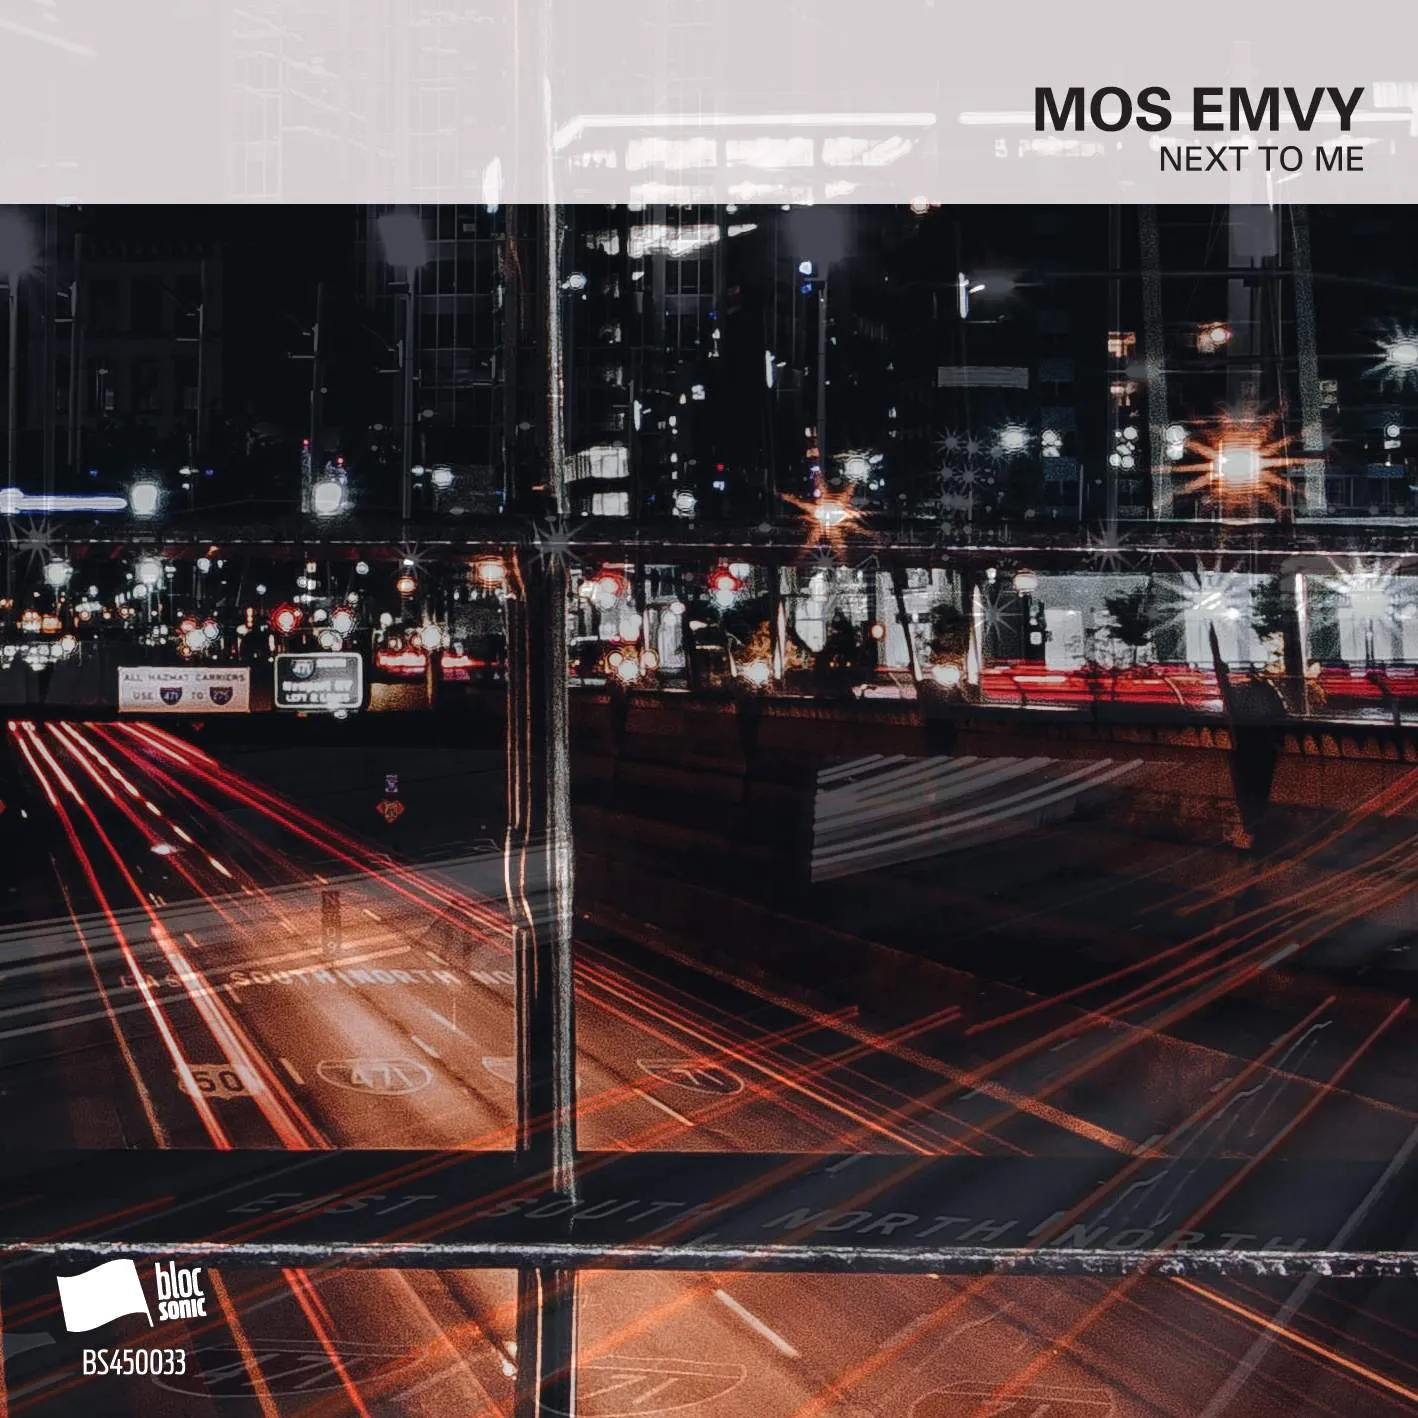 Album cover for “Next To Me” by Mos Emvy